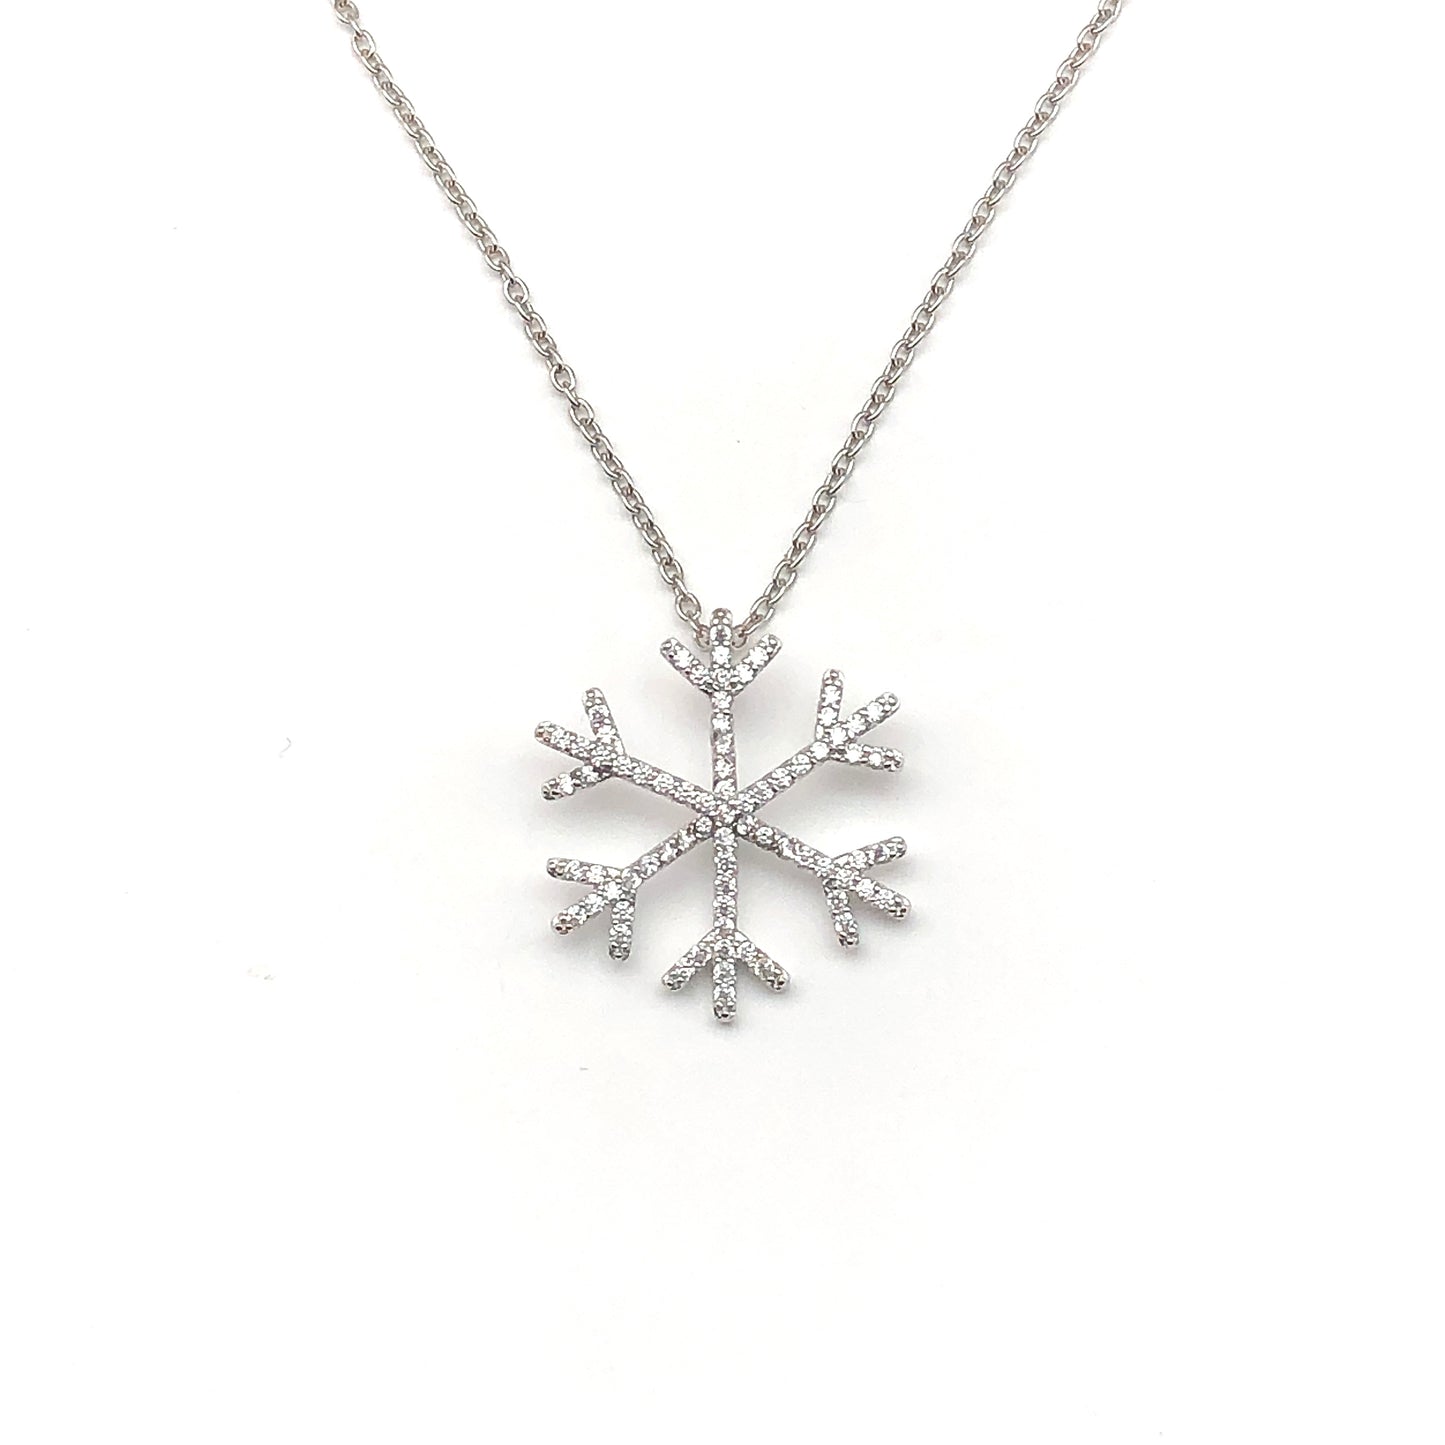 Silver Necklace | Cold Shoulder Style | 925 Sterling Crystalized Snow Flurry Pendant Necklace